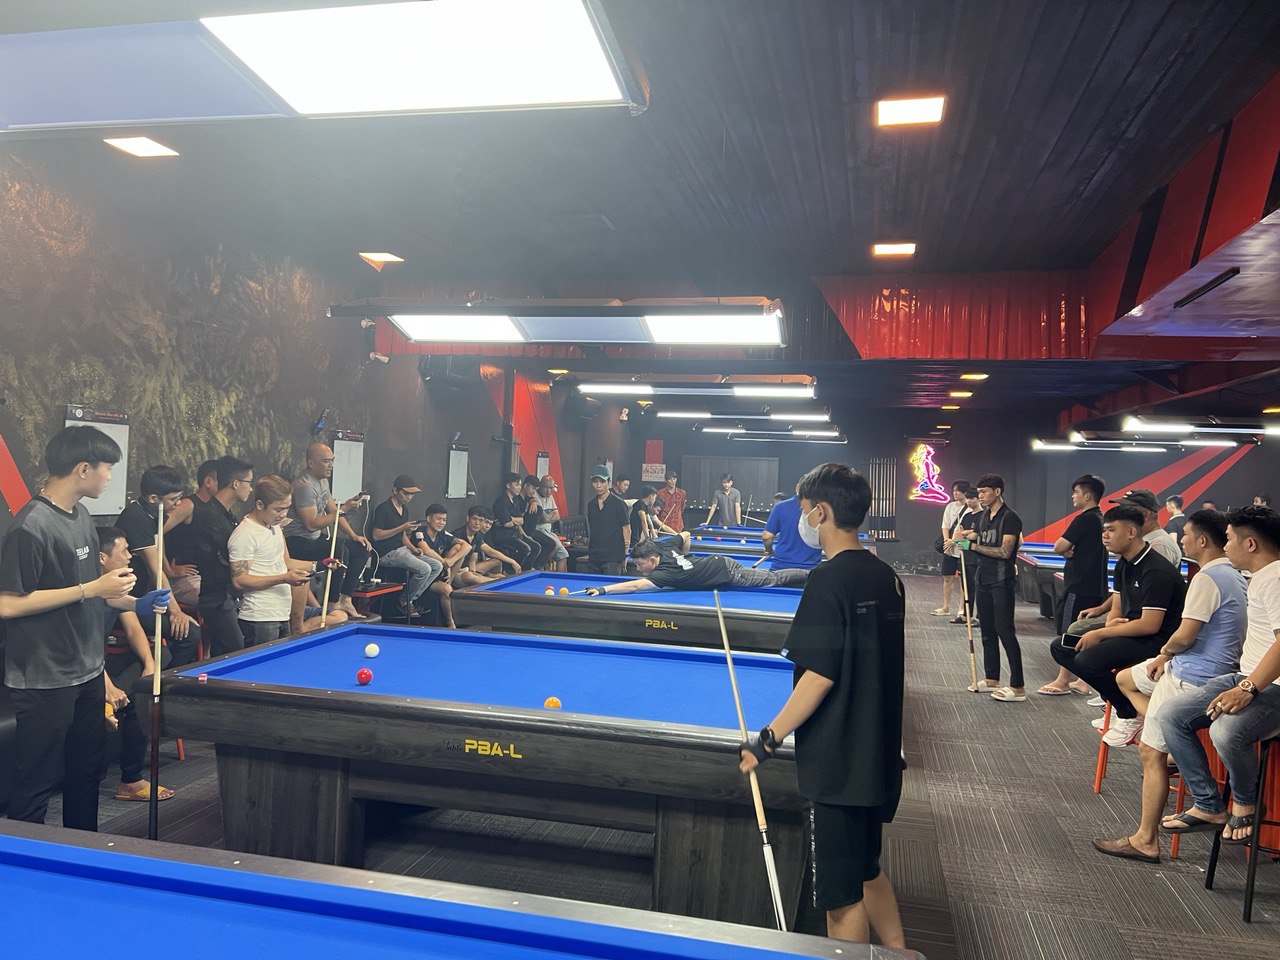 In Ho Chi Minh City, more and more young people fond of billiards despite prejudice